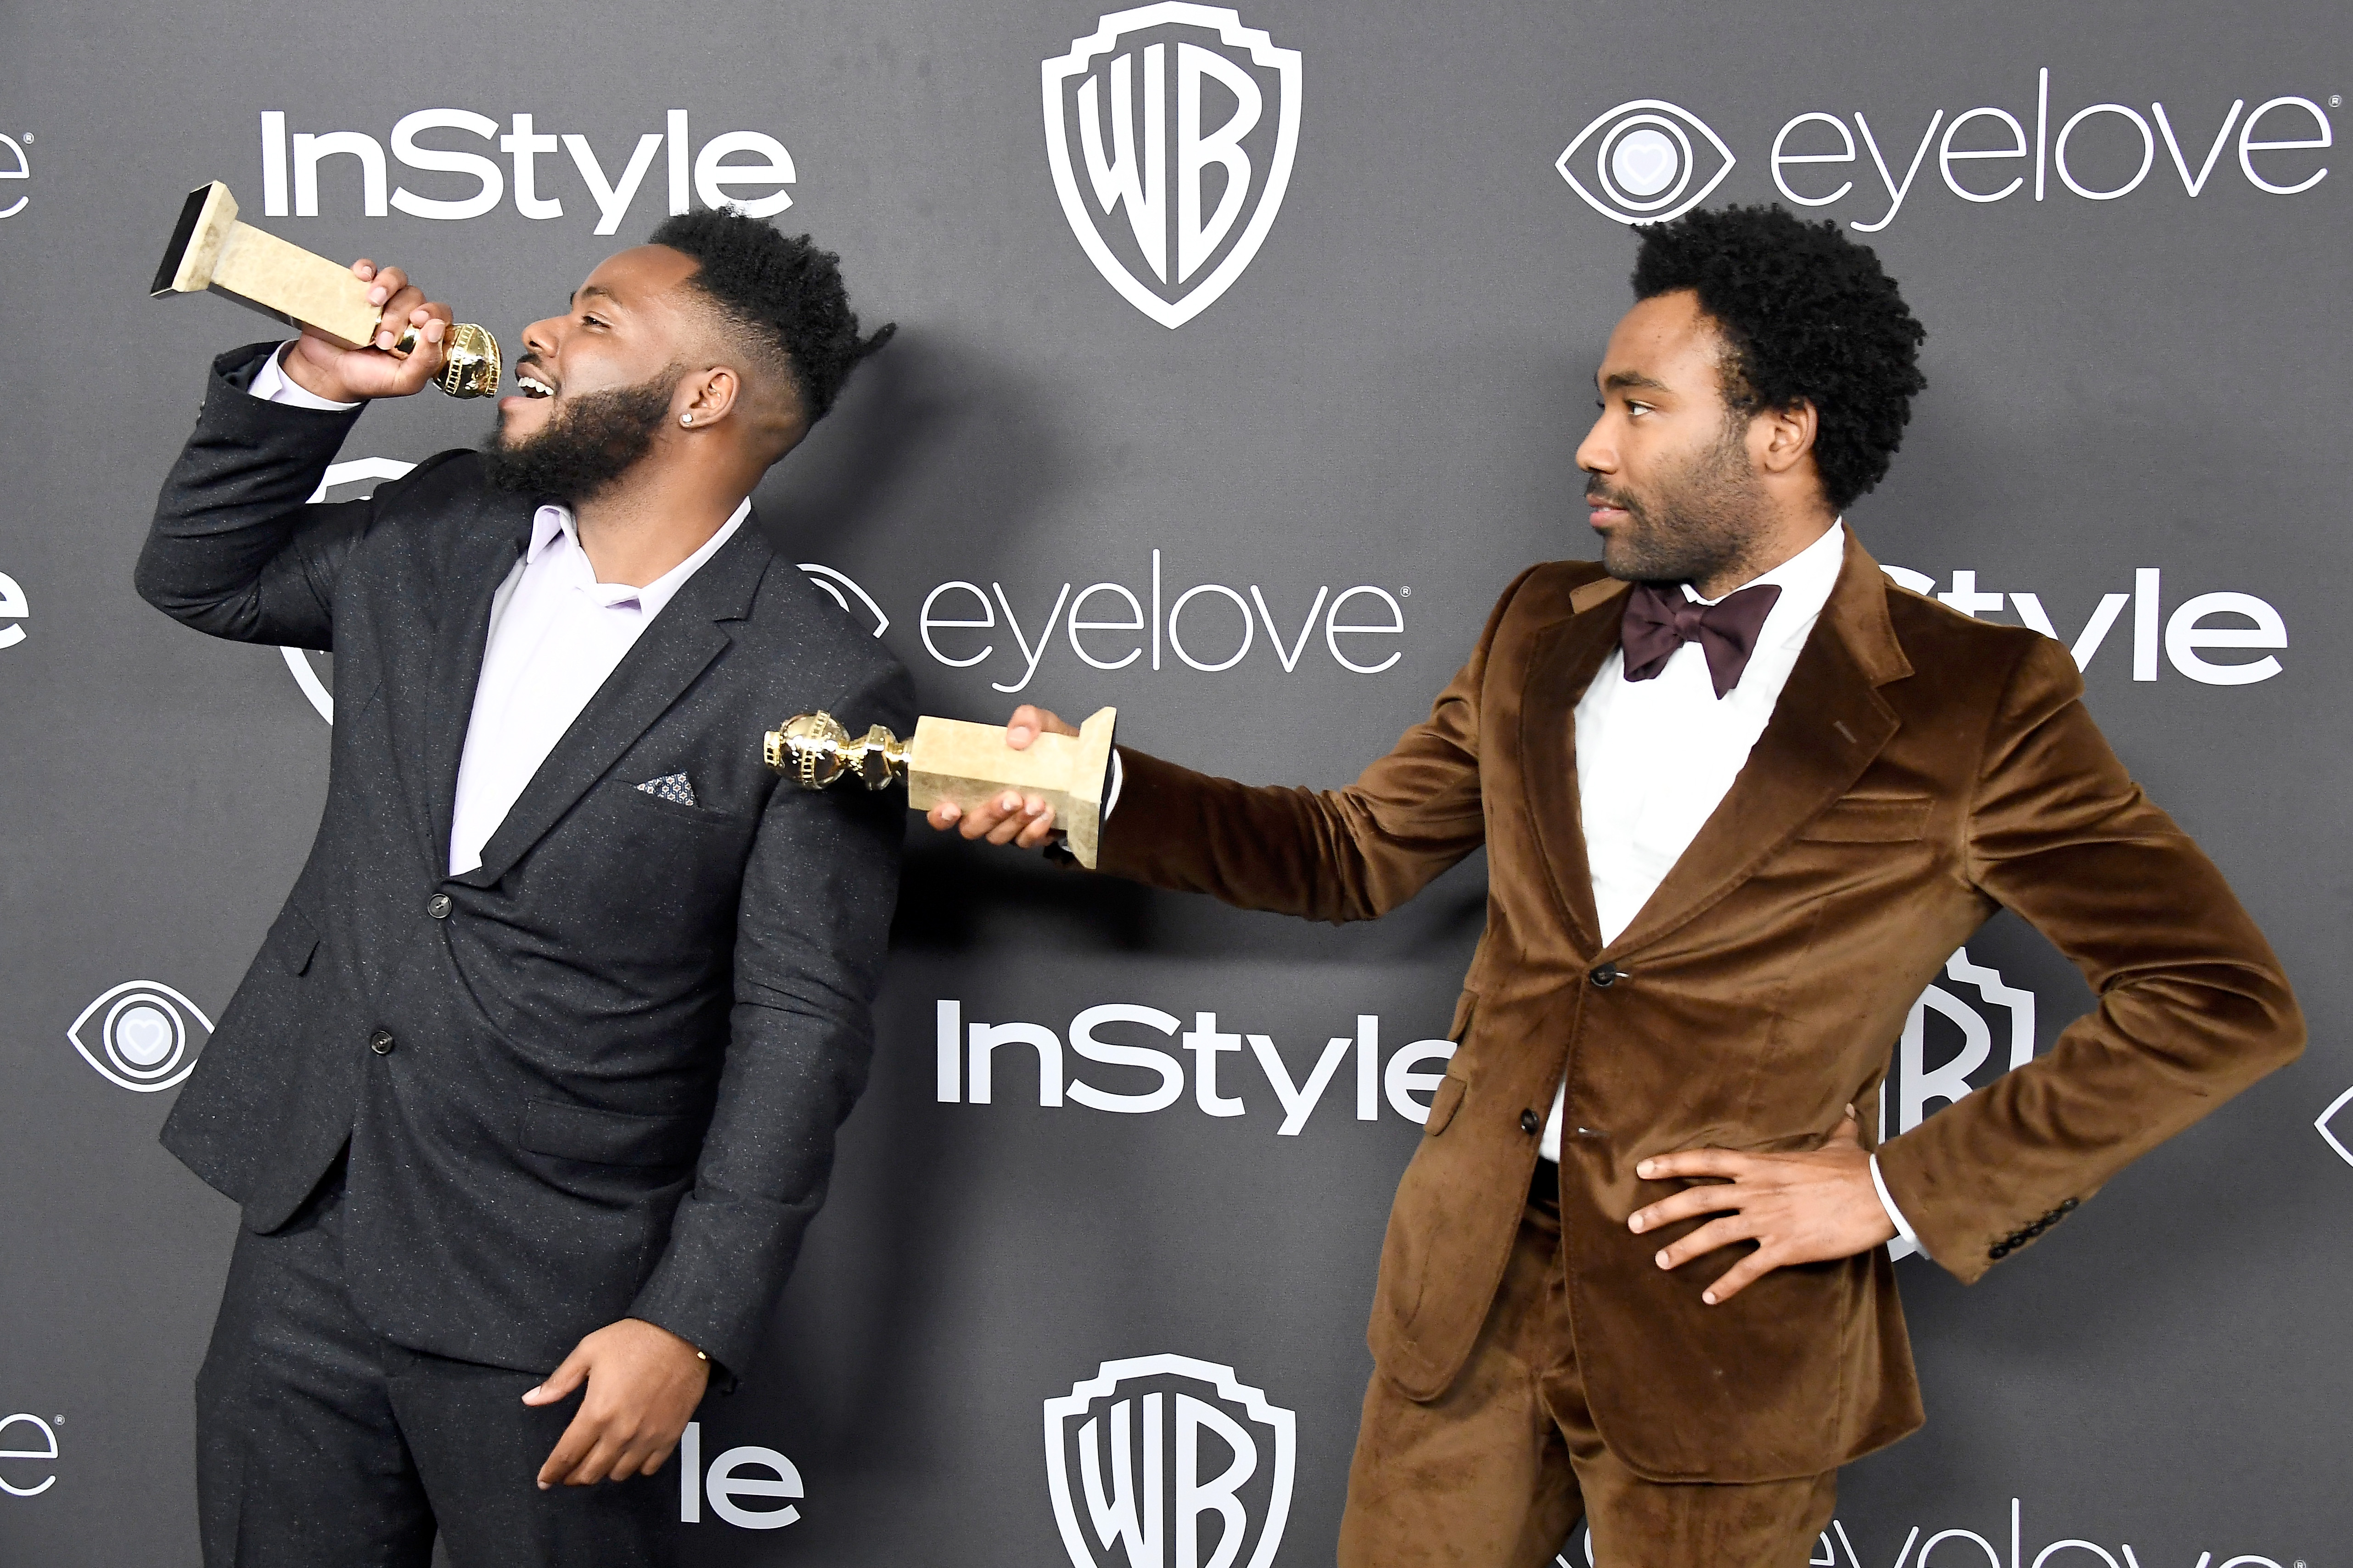 Stephen Glover and Donald Glover attend the 18th Annual Post Golden Globes Party